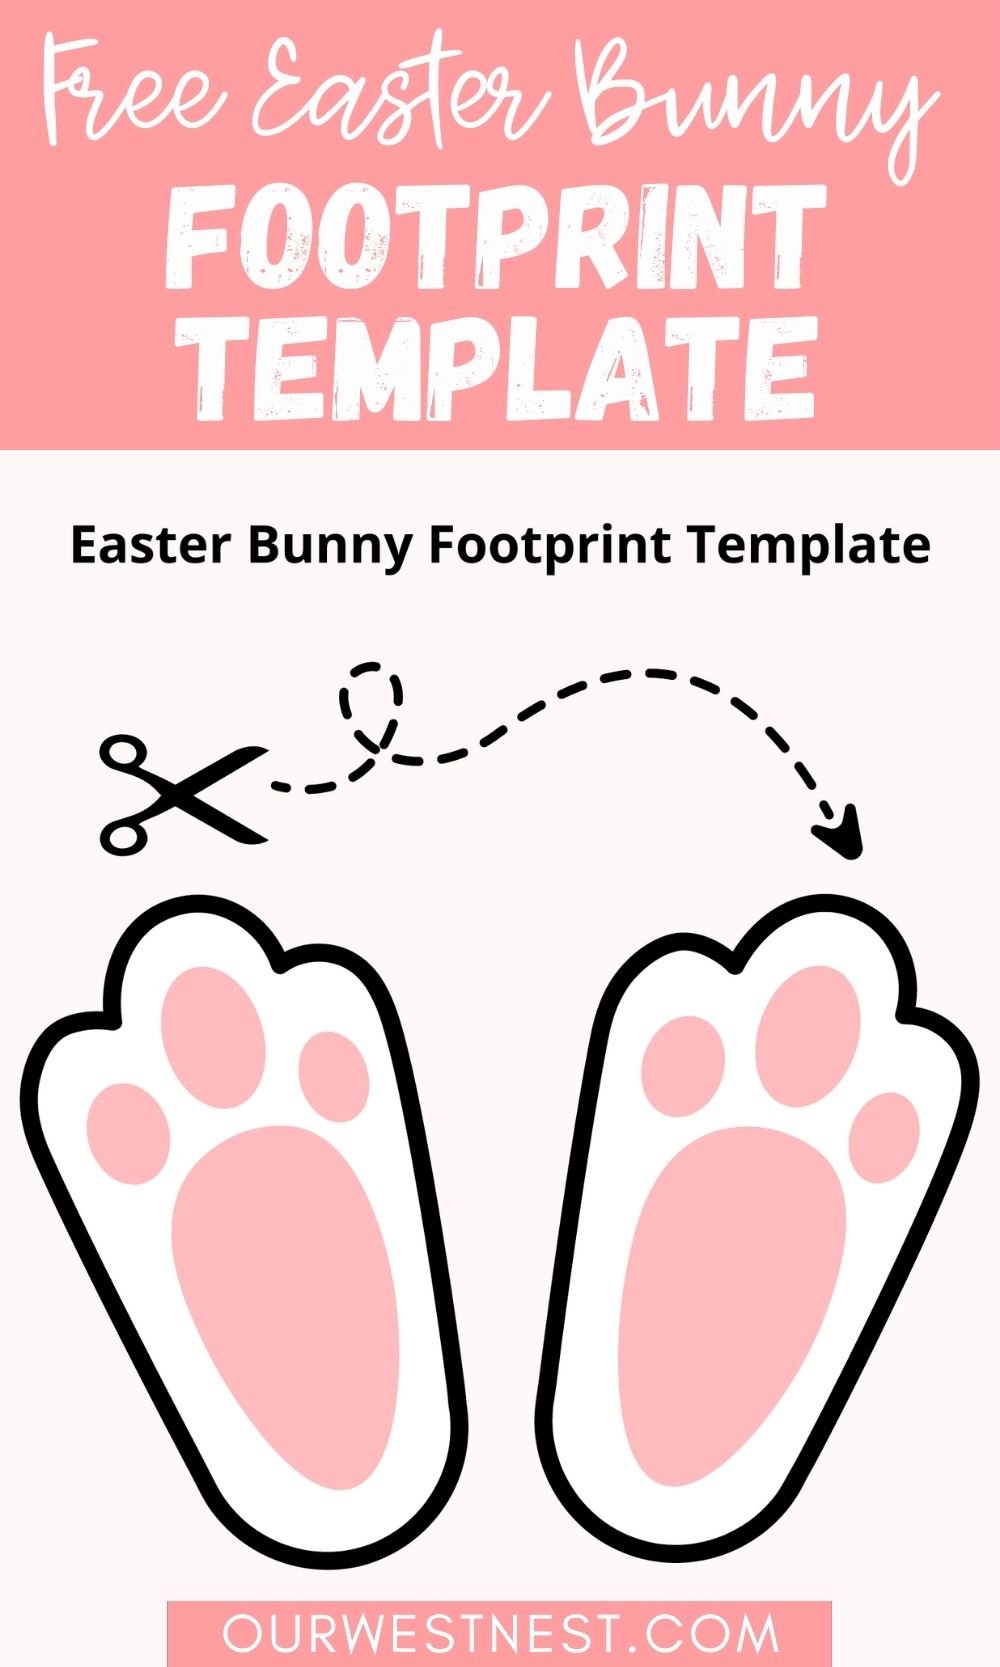 How To Make Bunny Footprints For Easter Free Easter Bunny Footprints 